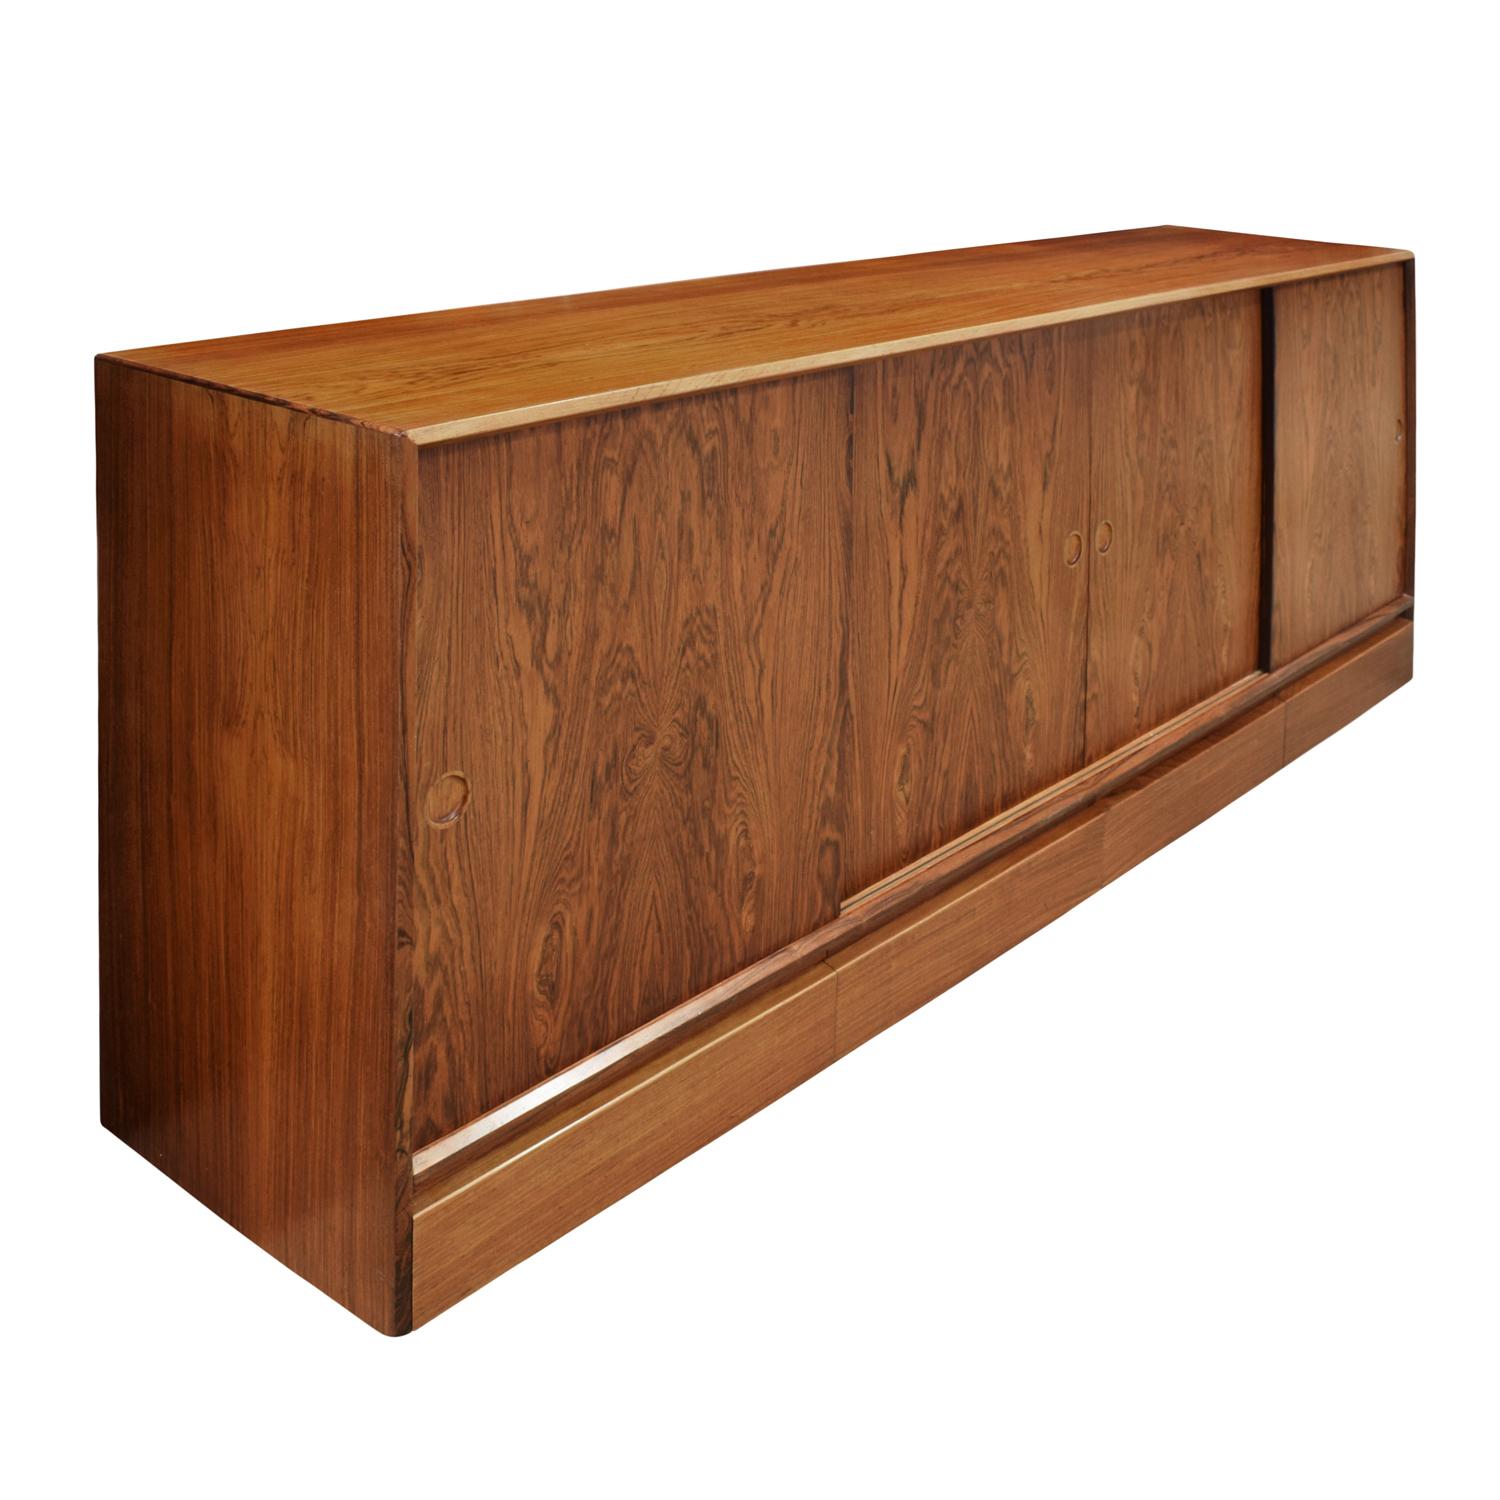 Beautifully made credenza in Brazilian rosewood, 4 sliding doors with 4 drawers below, with hand carved inset pulls by Henning Kjærnulf for V&S, Denmark 1960s (signed “V&S Made in Denmark” on back). This piece is beautifully outfitted with felt